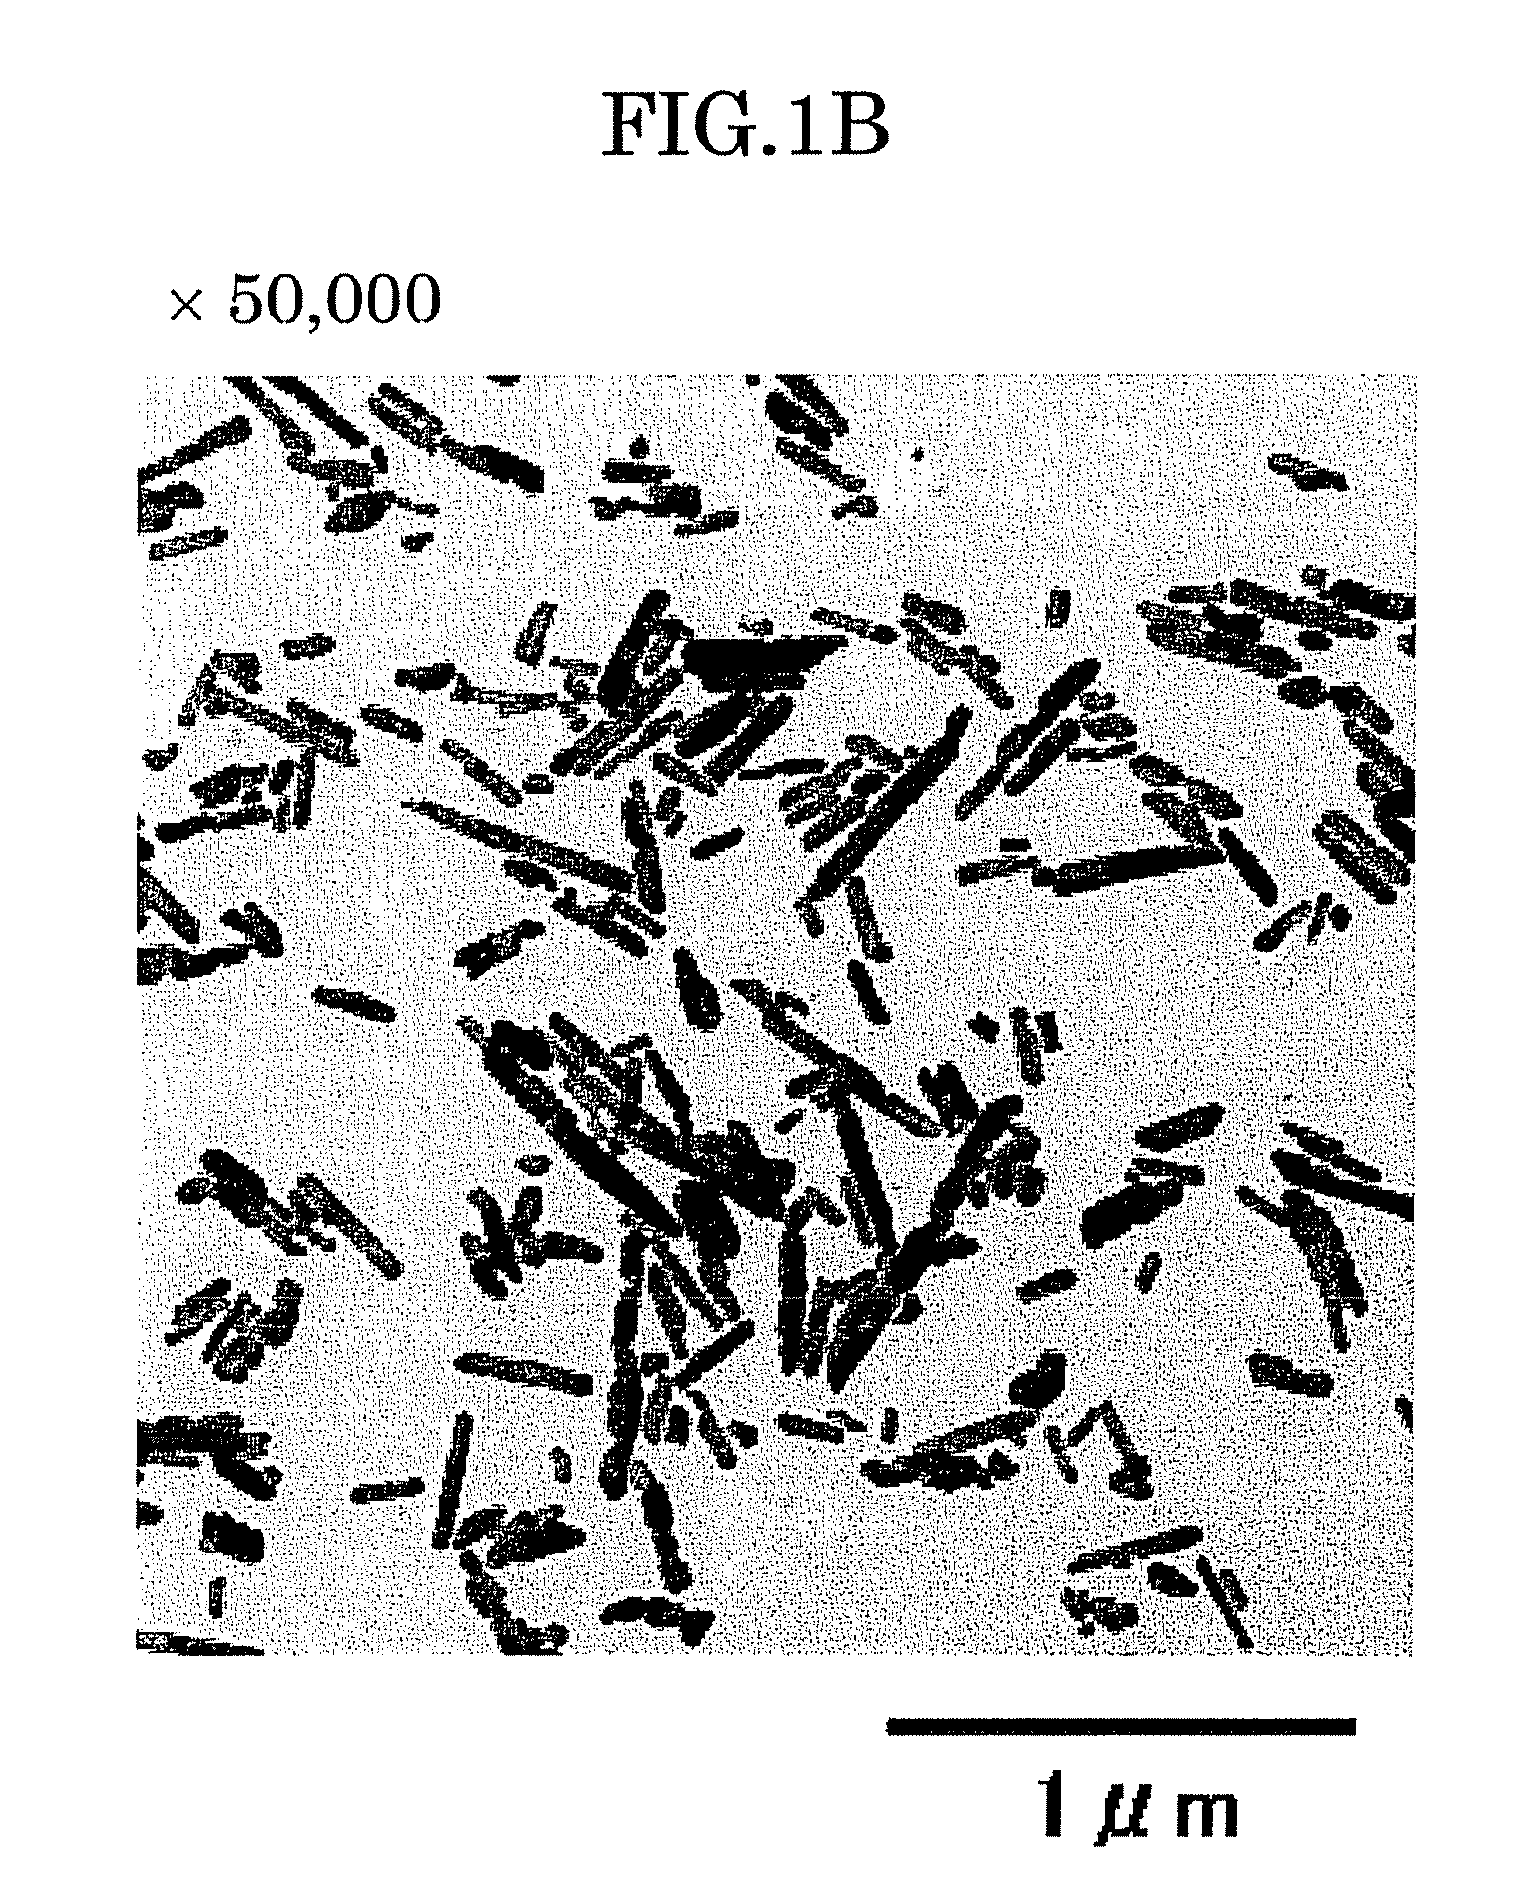 Carbonates and Method for Producing the Same